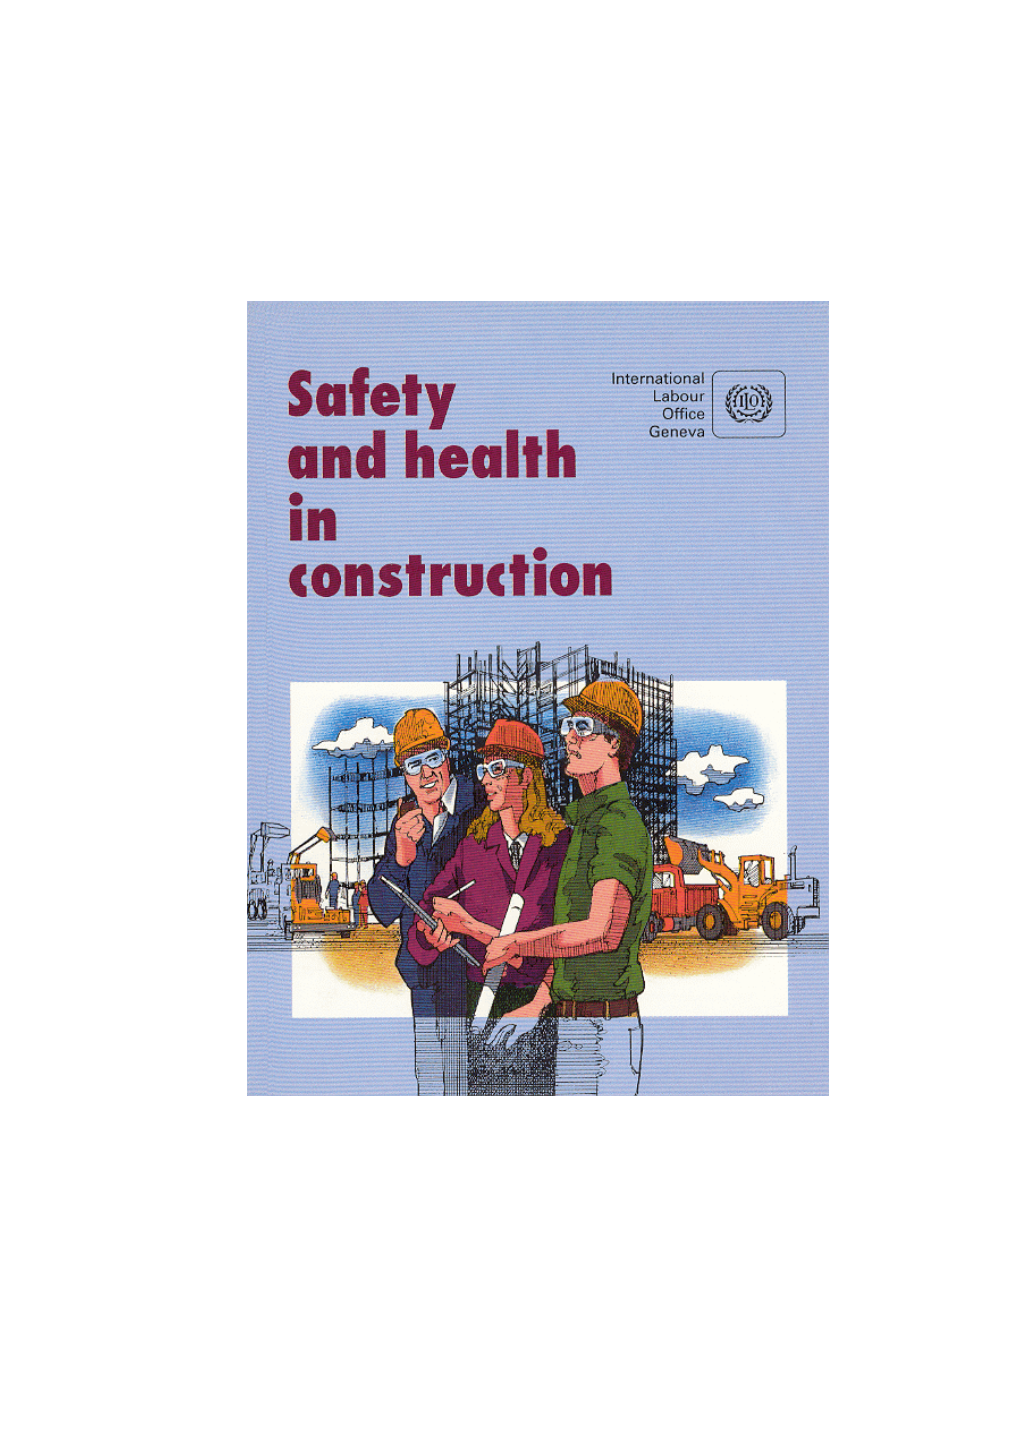 ILO Code of Practice on Safety and Health in Construction